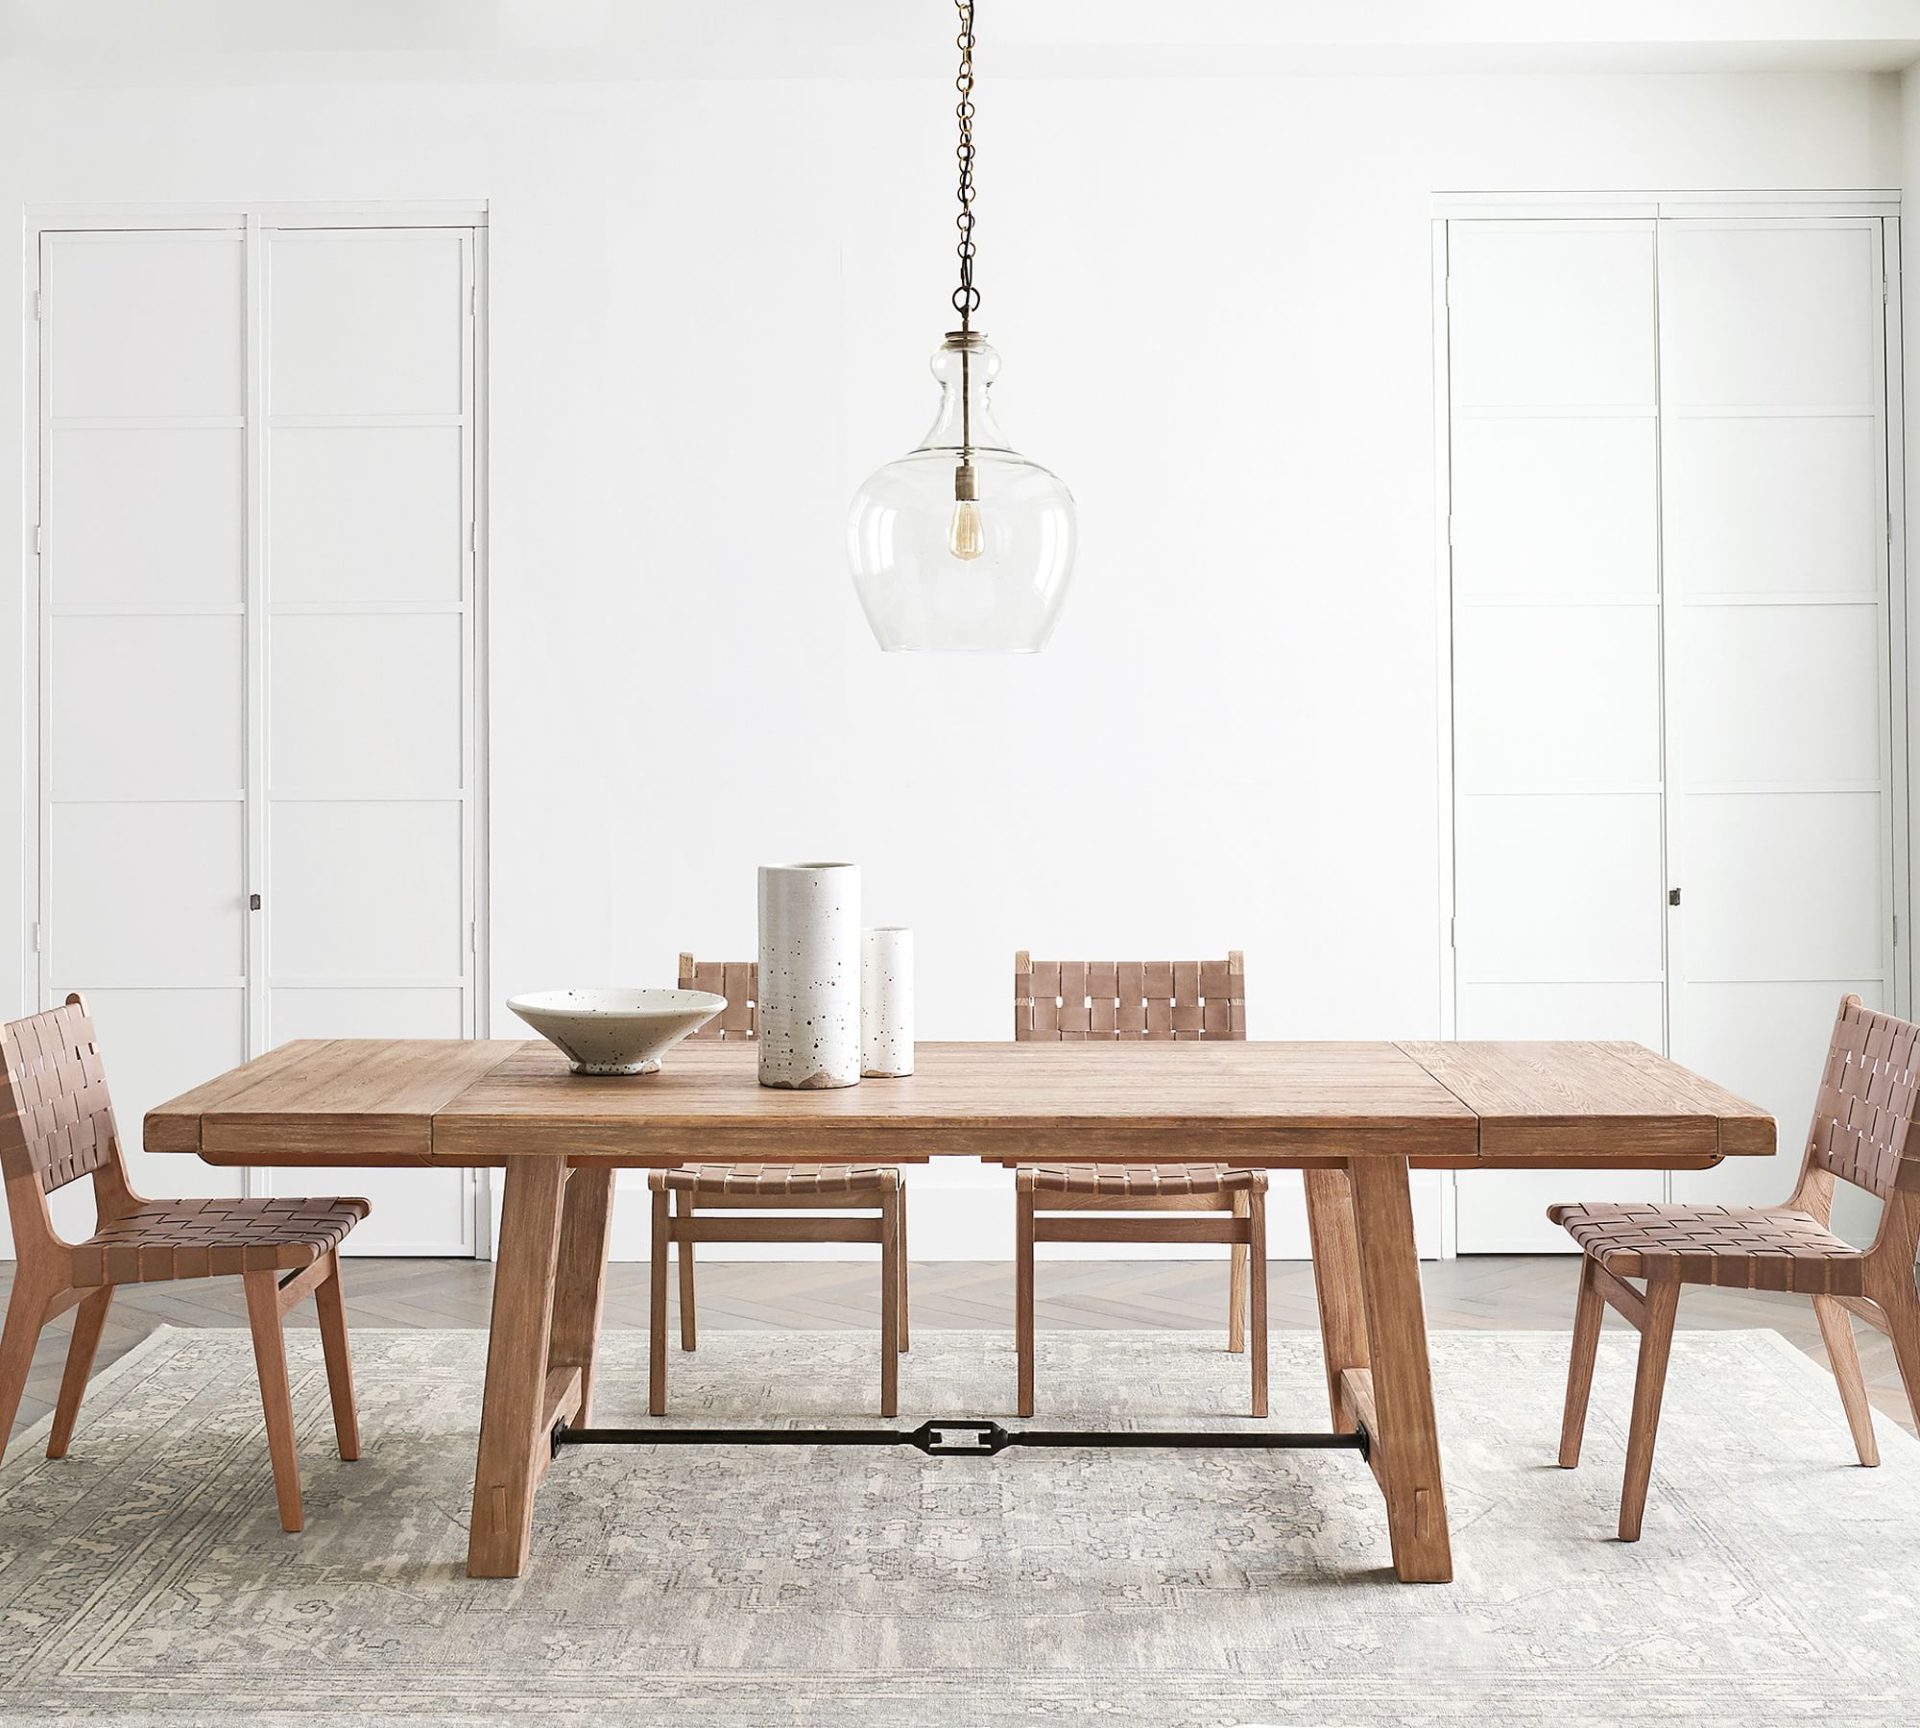 wood expandable dining table that can seat 6 comfortably.